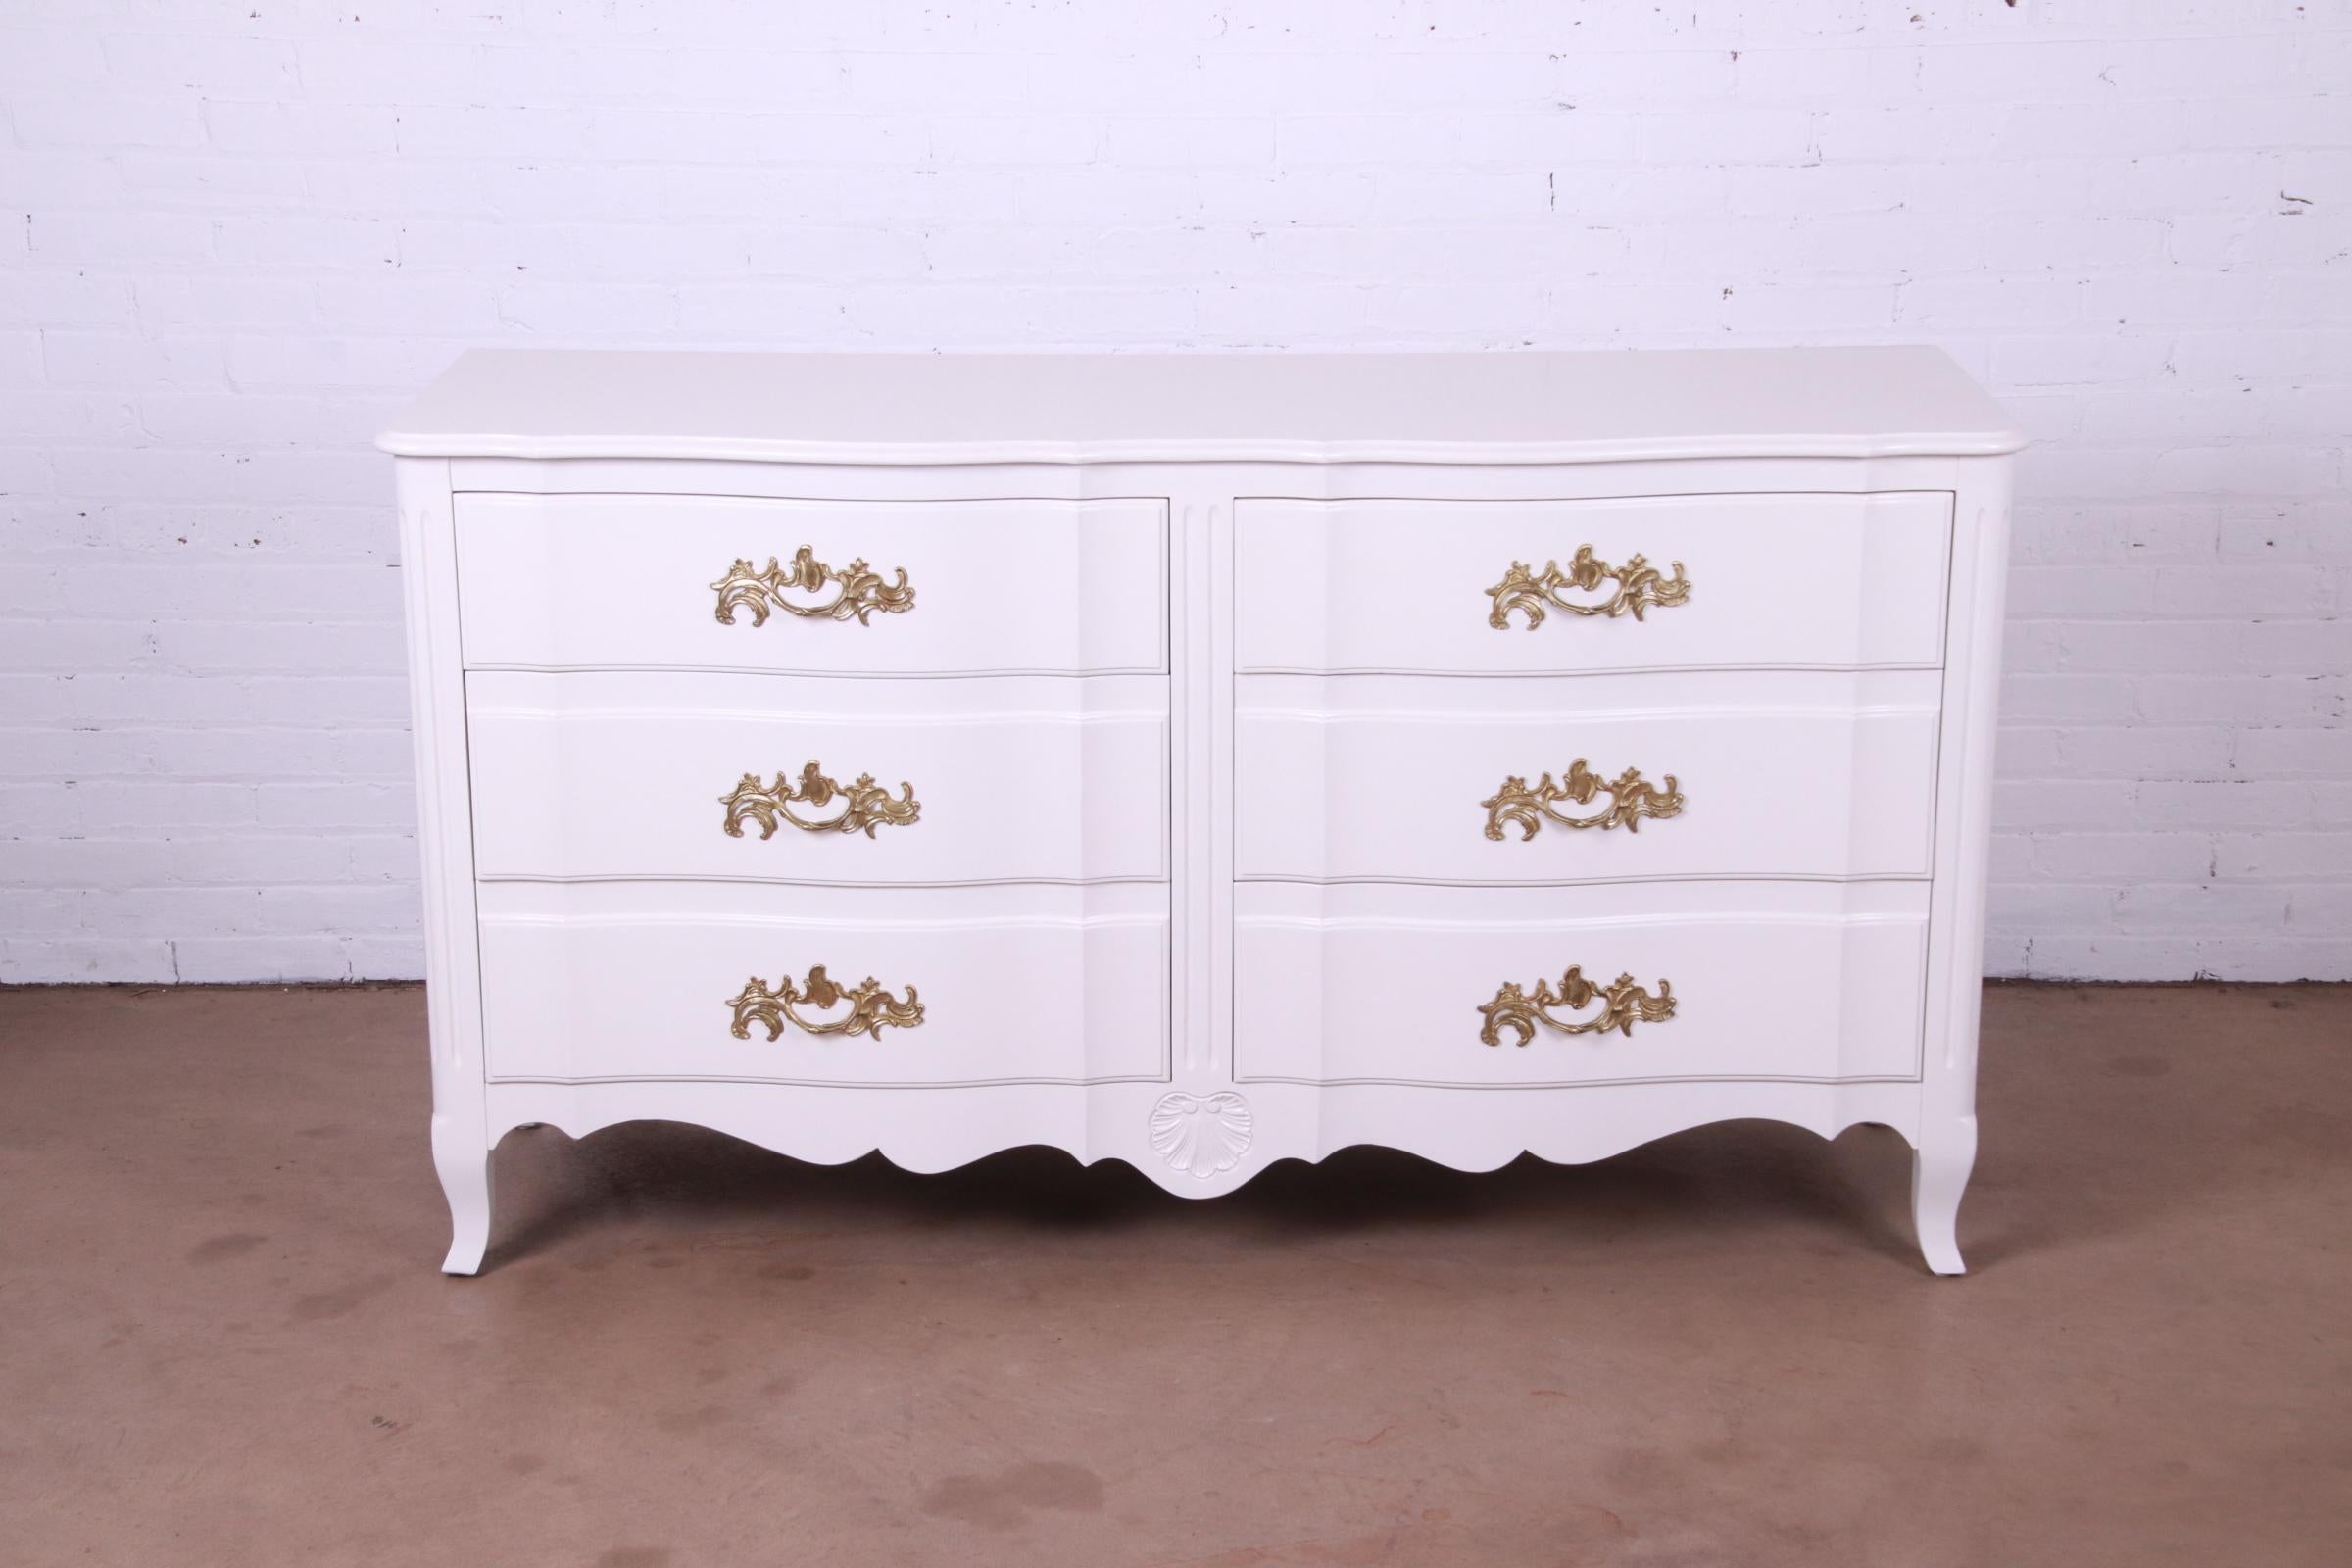 An exceptional French Provincial Louis XV style six-drawer dresser or credenza

Designed by Ralph Widdicomb for John Widdicomb Co.

USA, Circa 1940s

White lacquered carved solid cherry wood, with original brass hardware.

Measures: 64